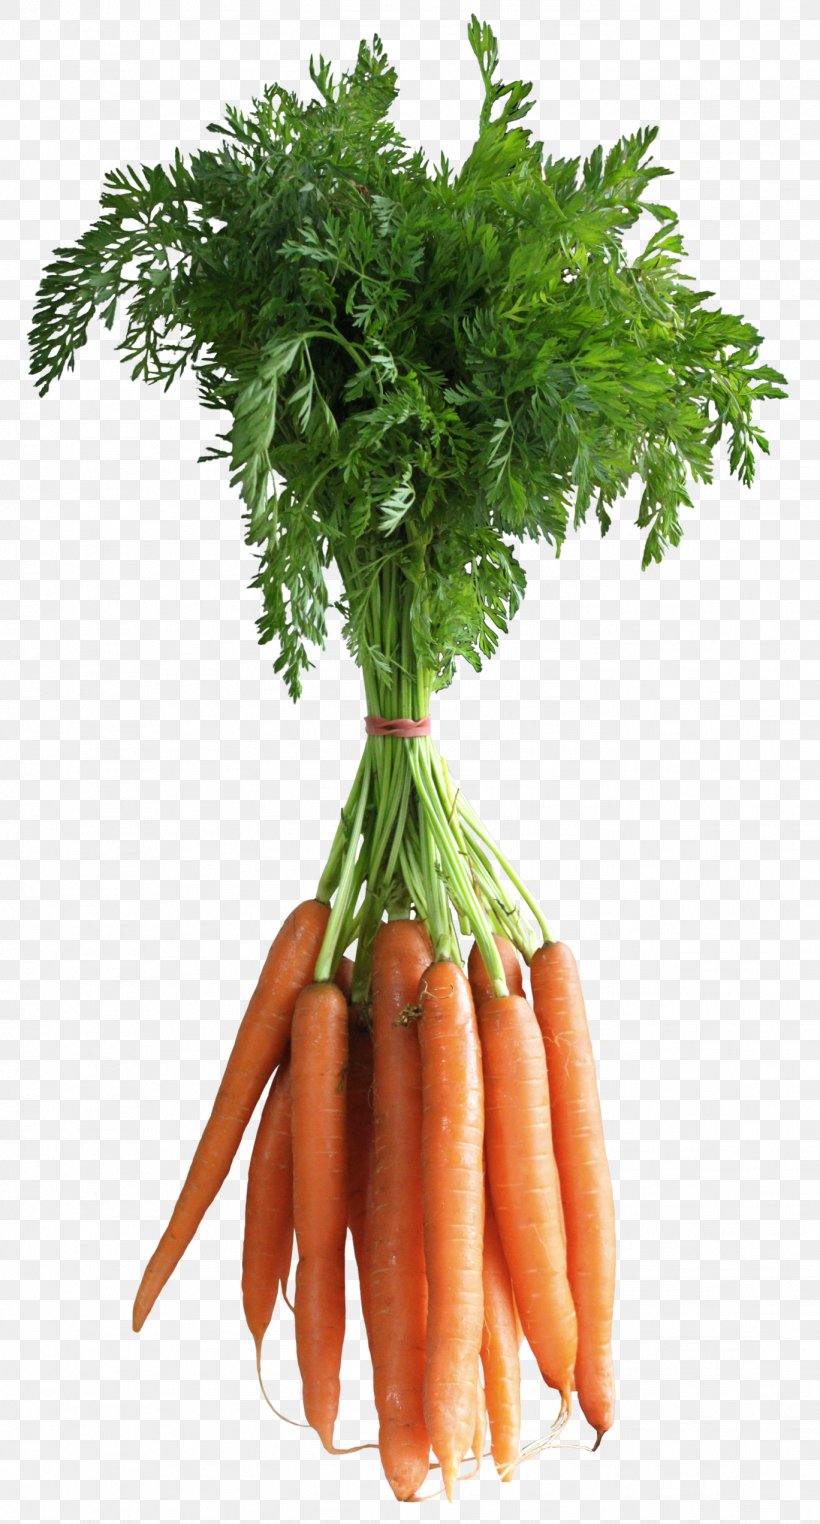 Carrot Vegetable Computer File, PNG, 1368x2544px, Carrot, Baby Carrot, Carrot Juice, Flowerpot, Food Download Free